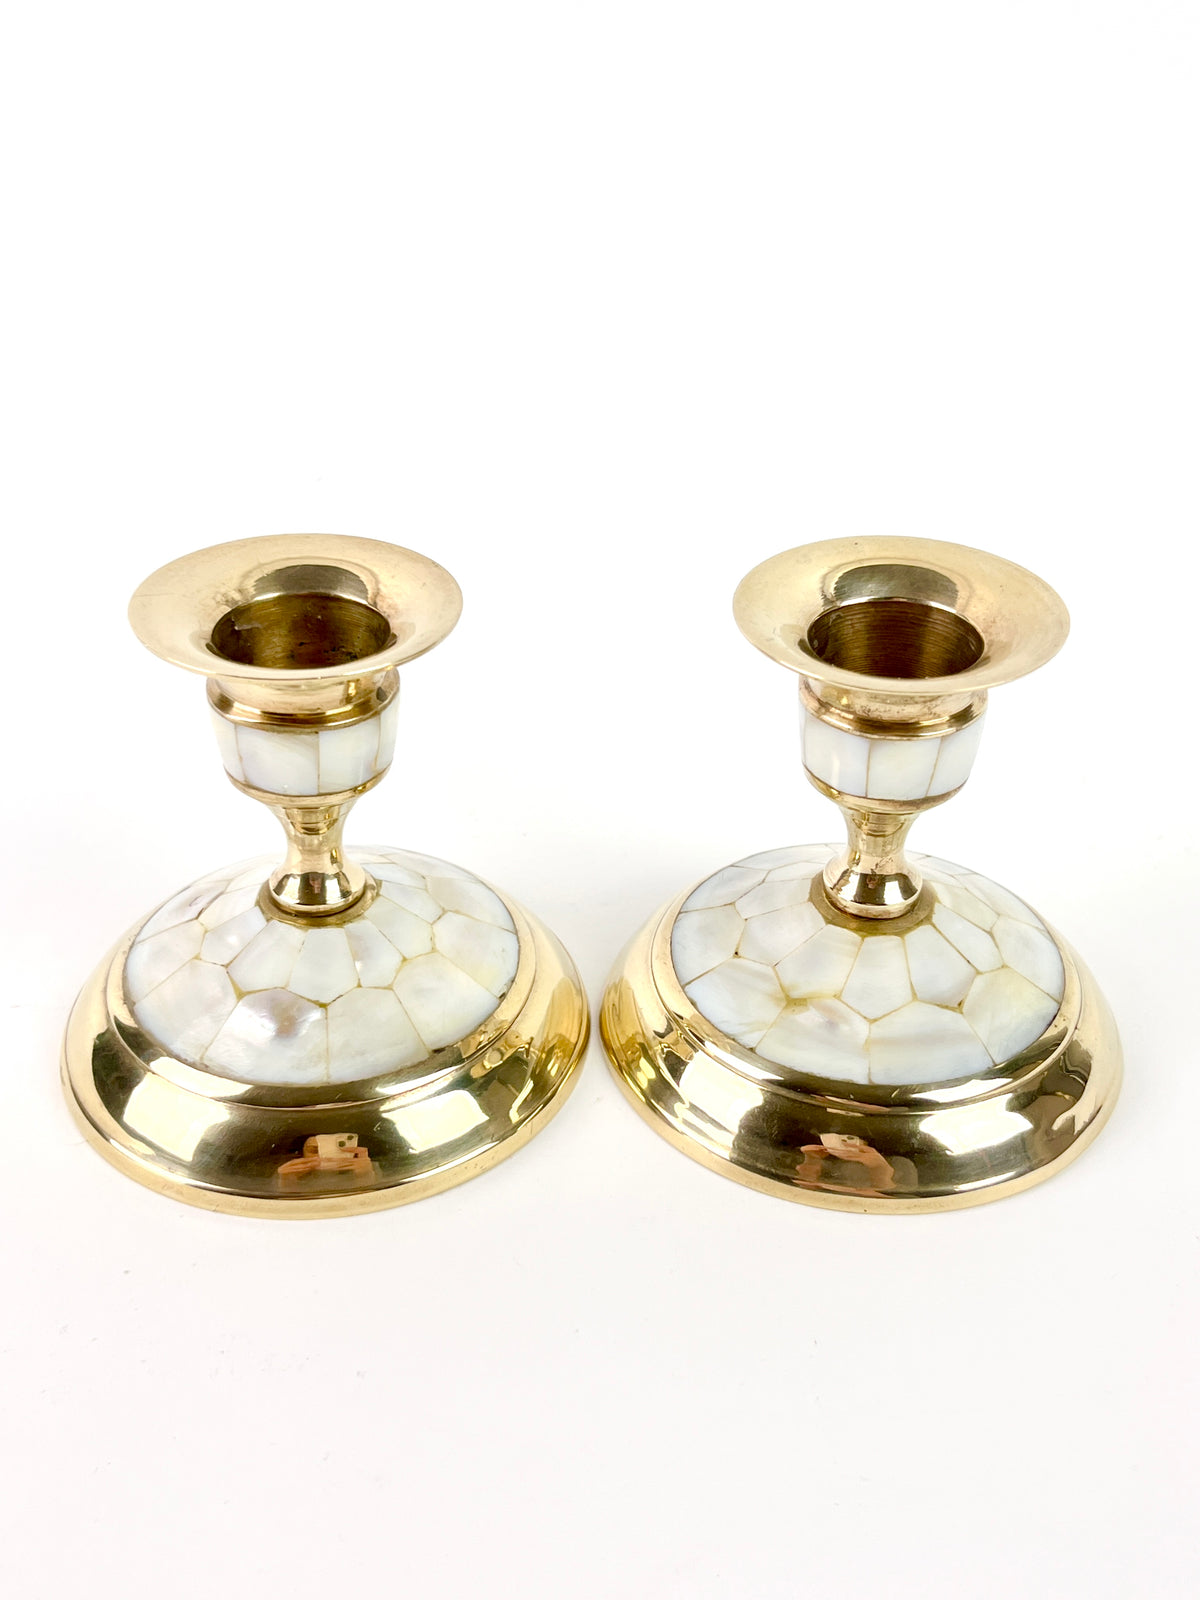 Vintage Brass & Mother of Pearl Candle Holders